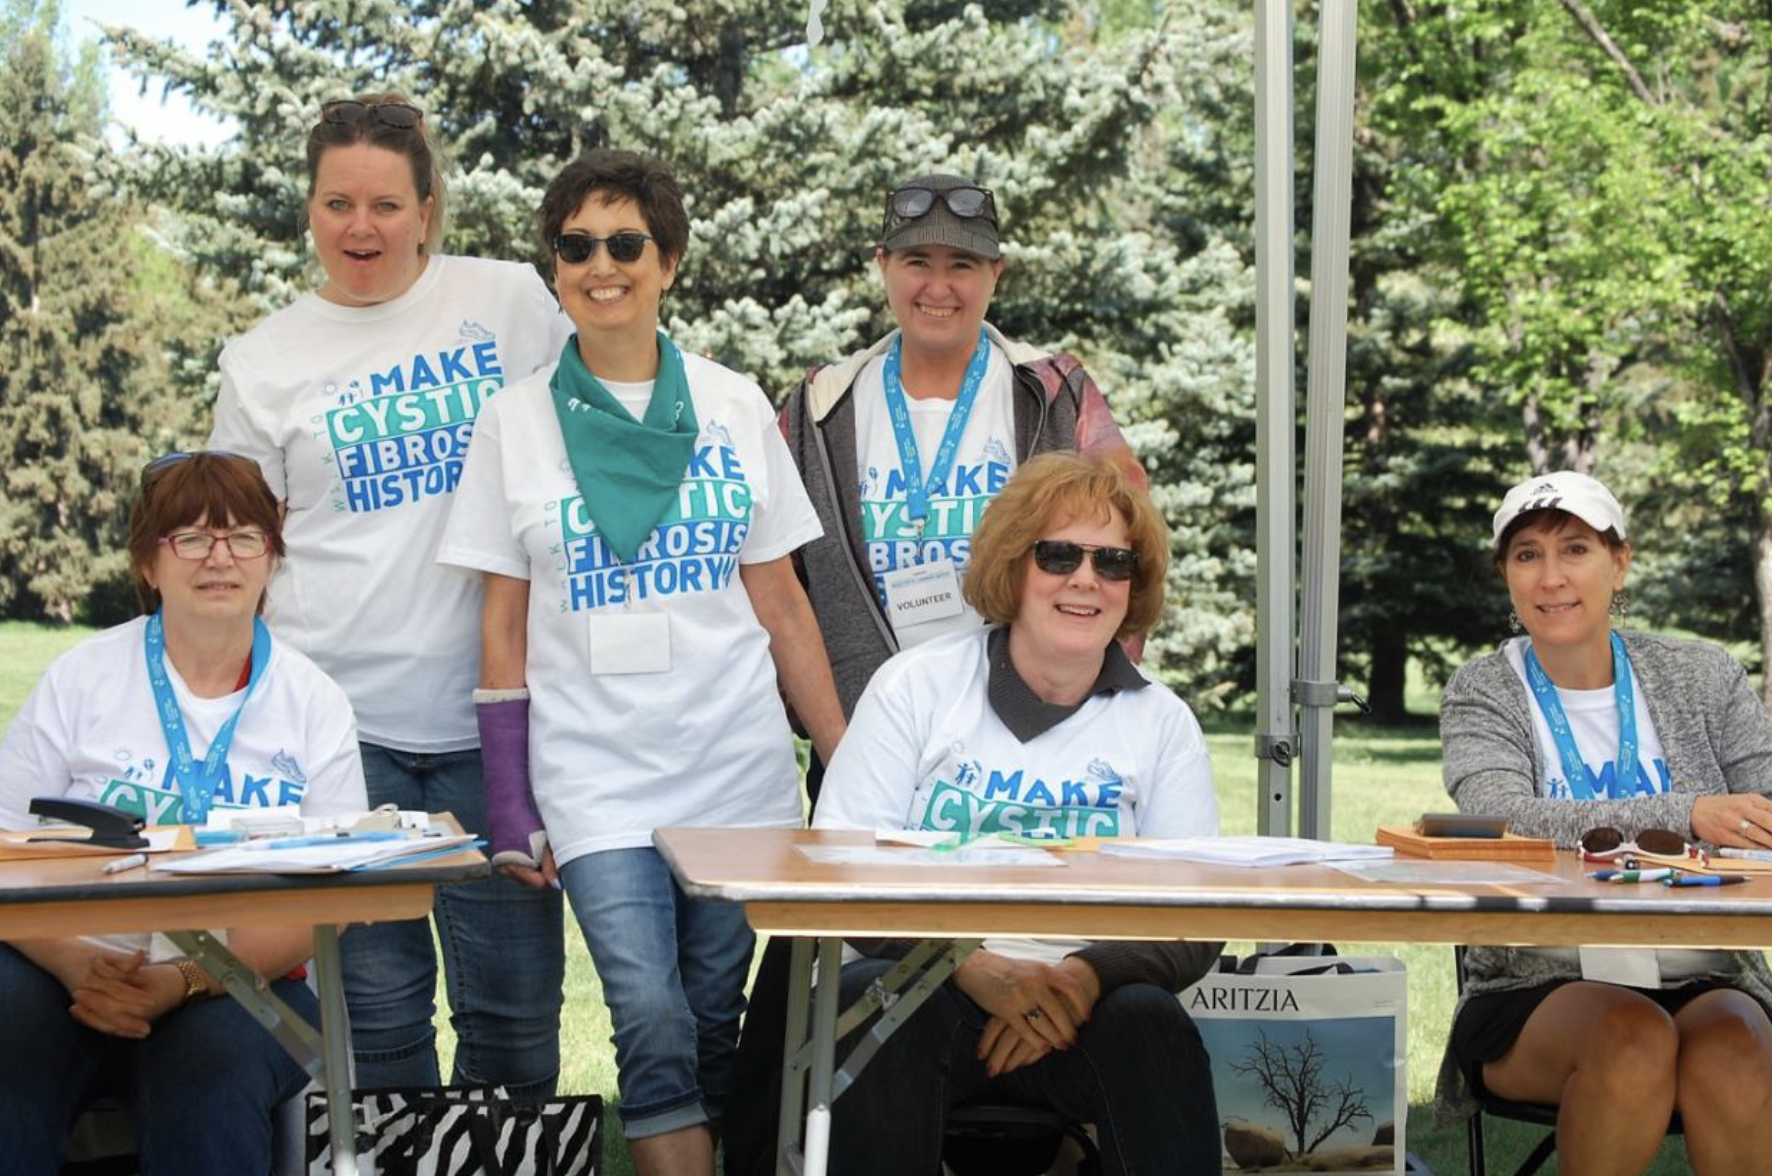 A group of volunteers at a walk to make cystic fibrosis history